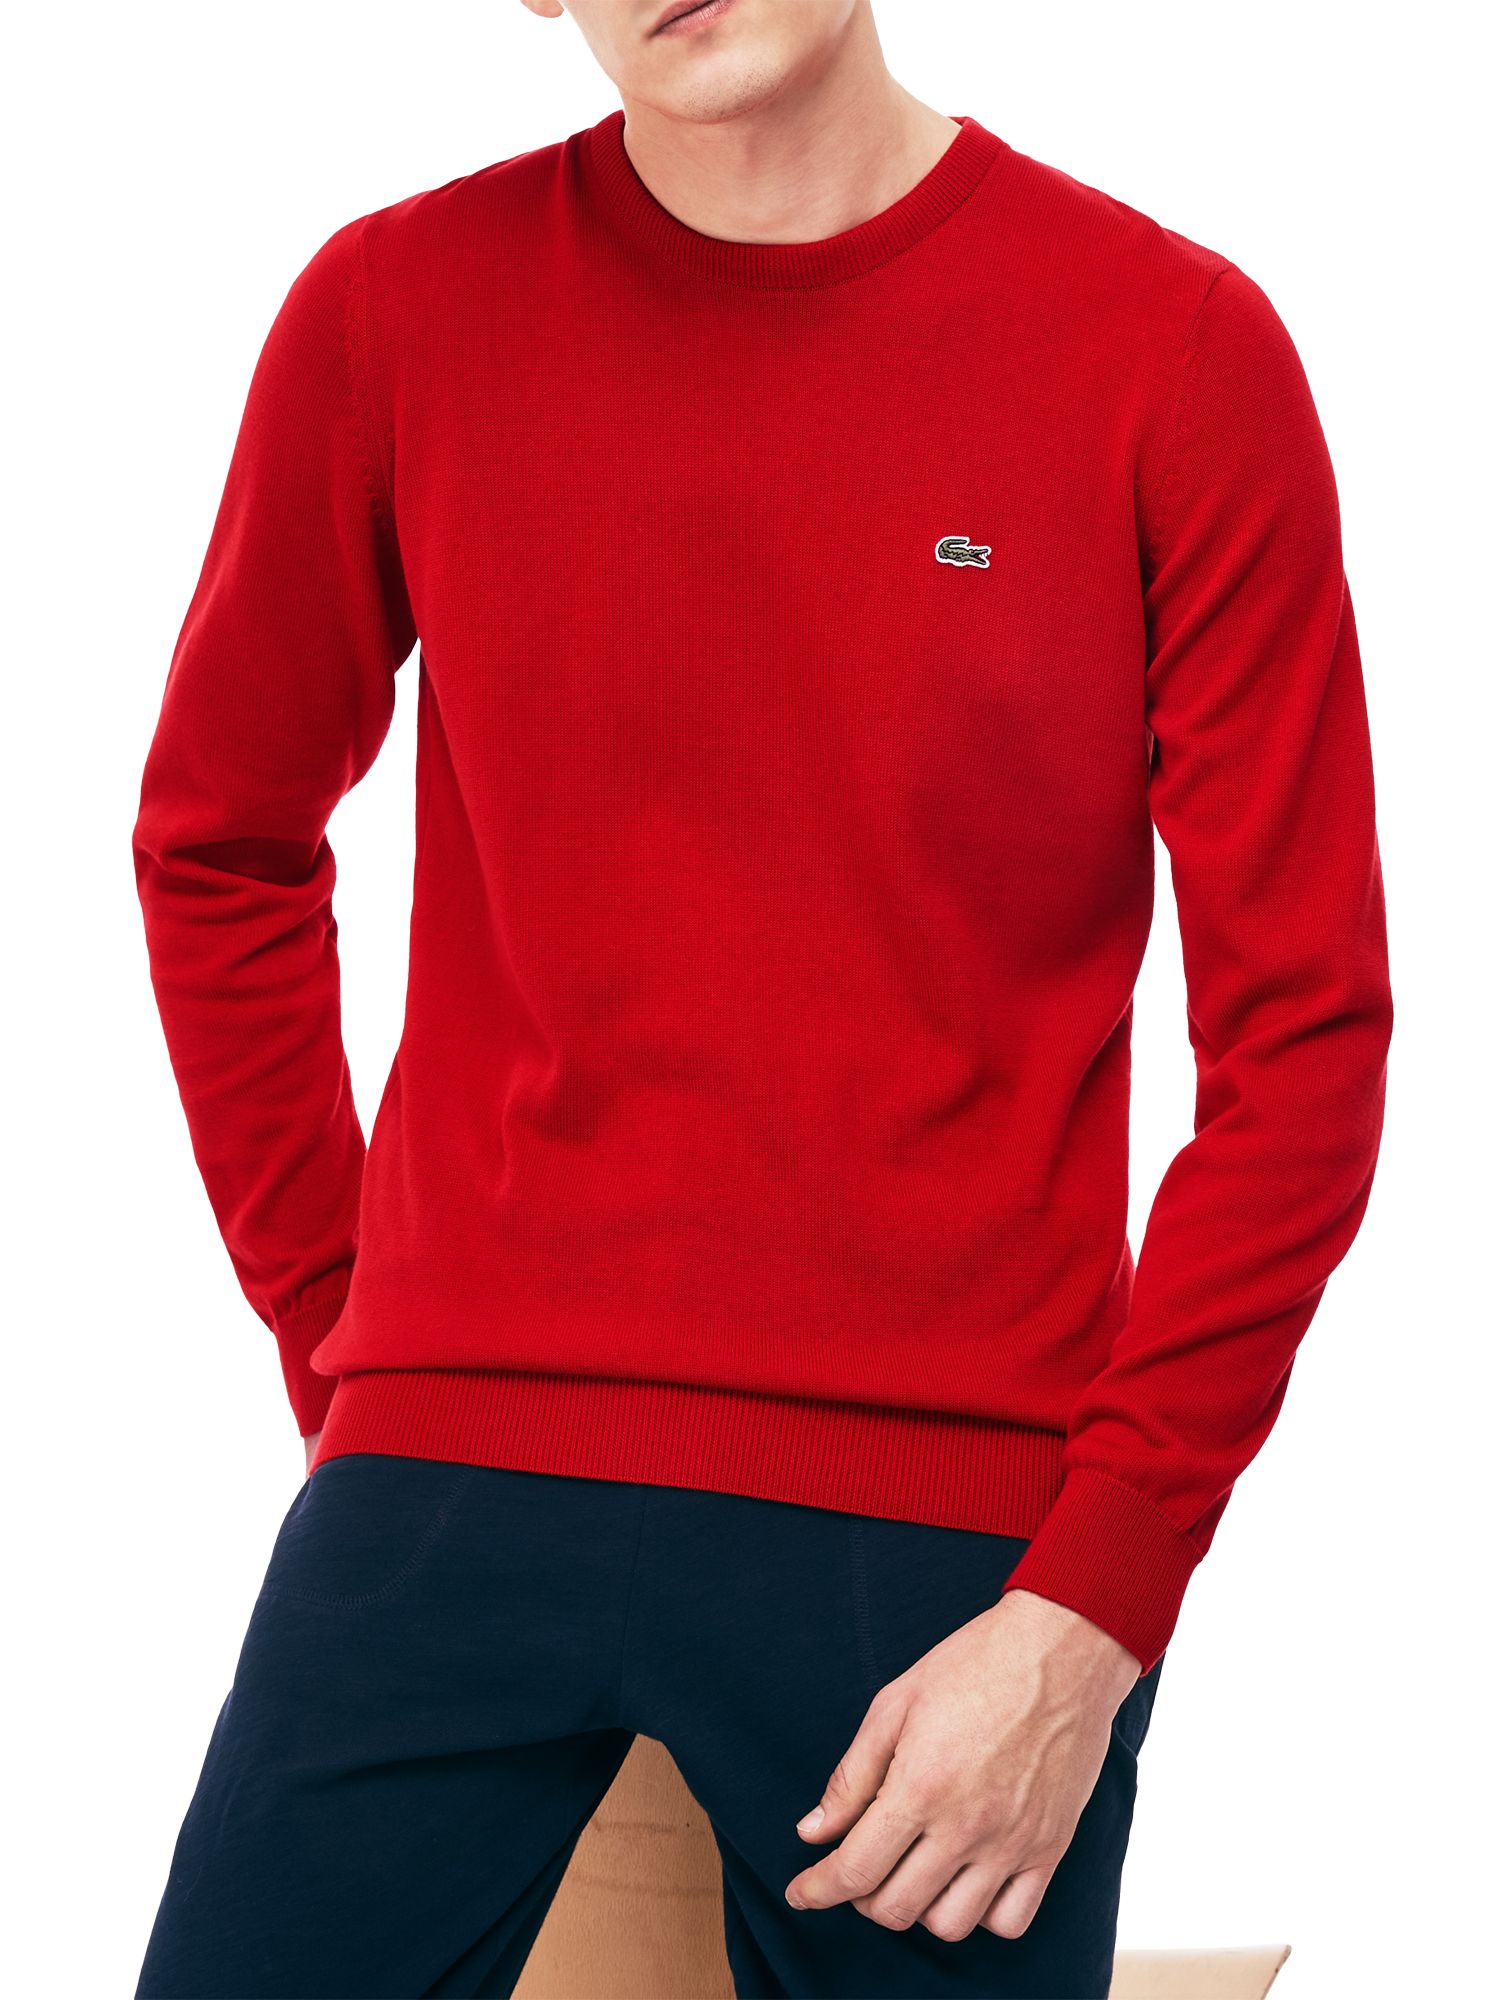 lacoste jumpers cheap